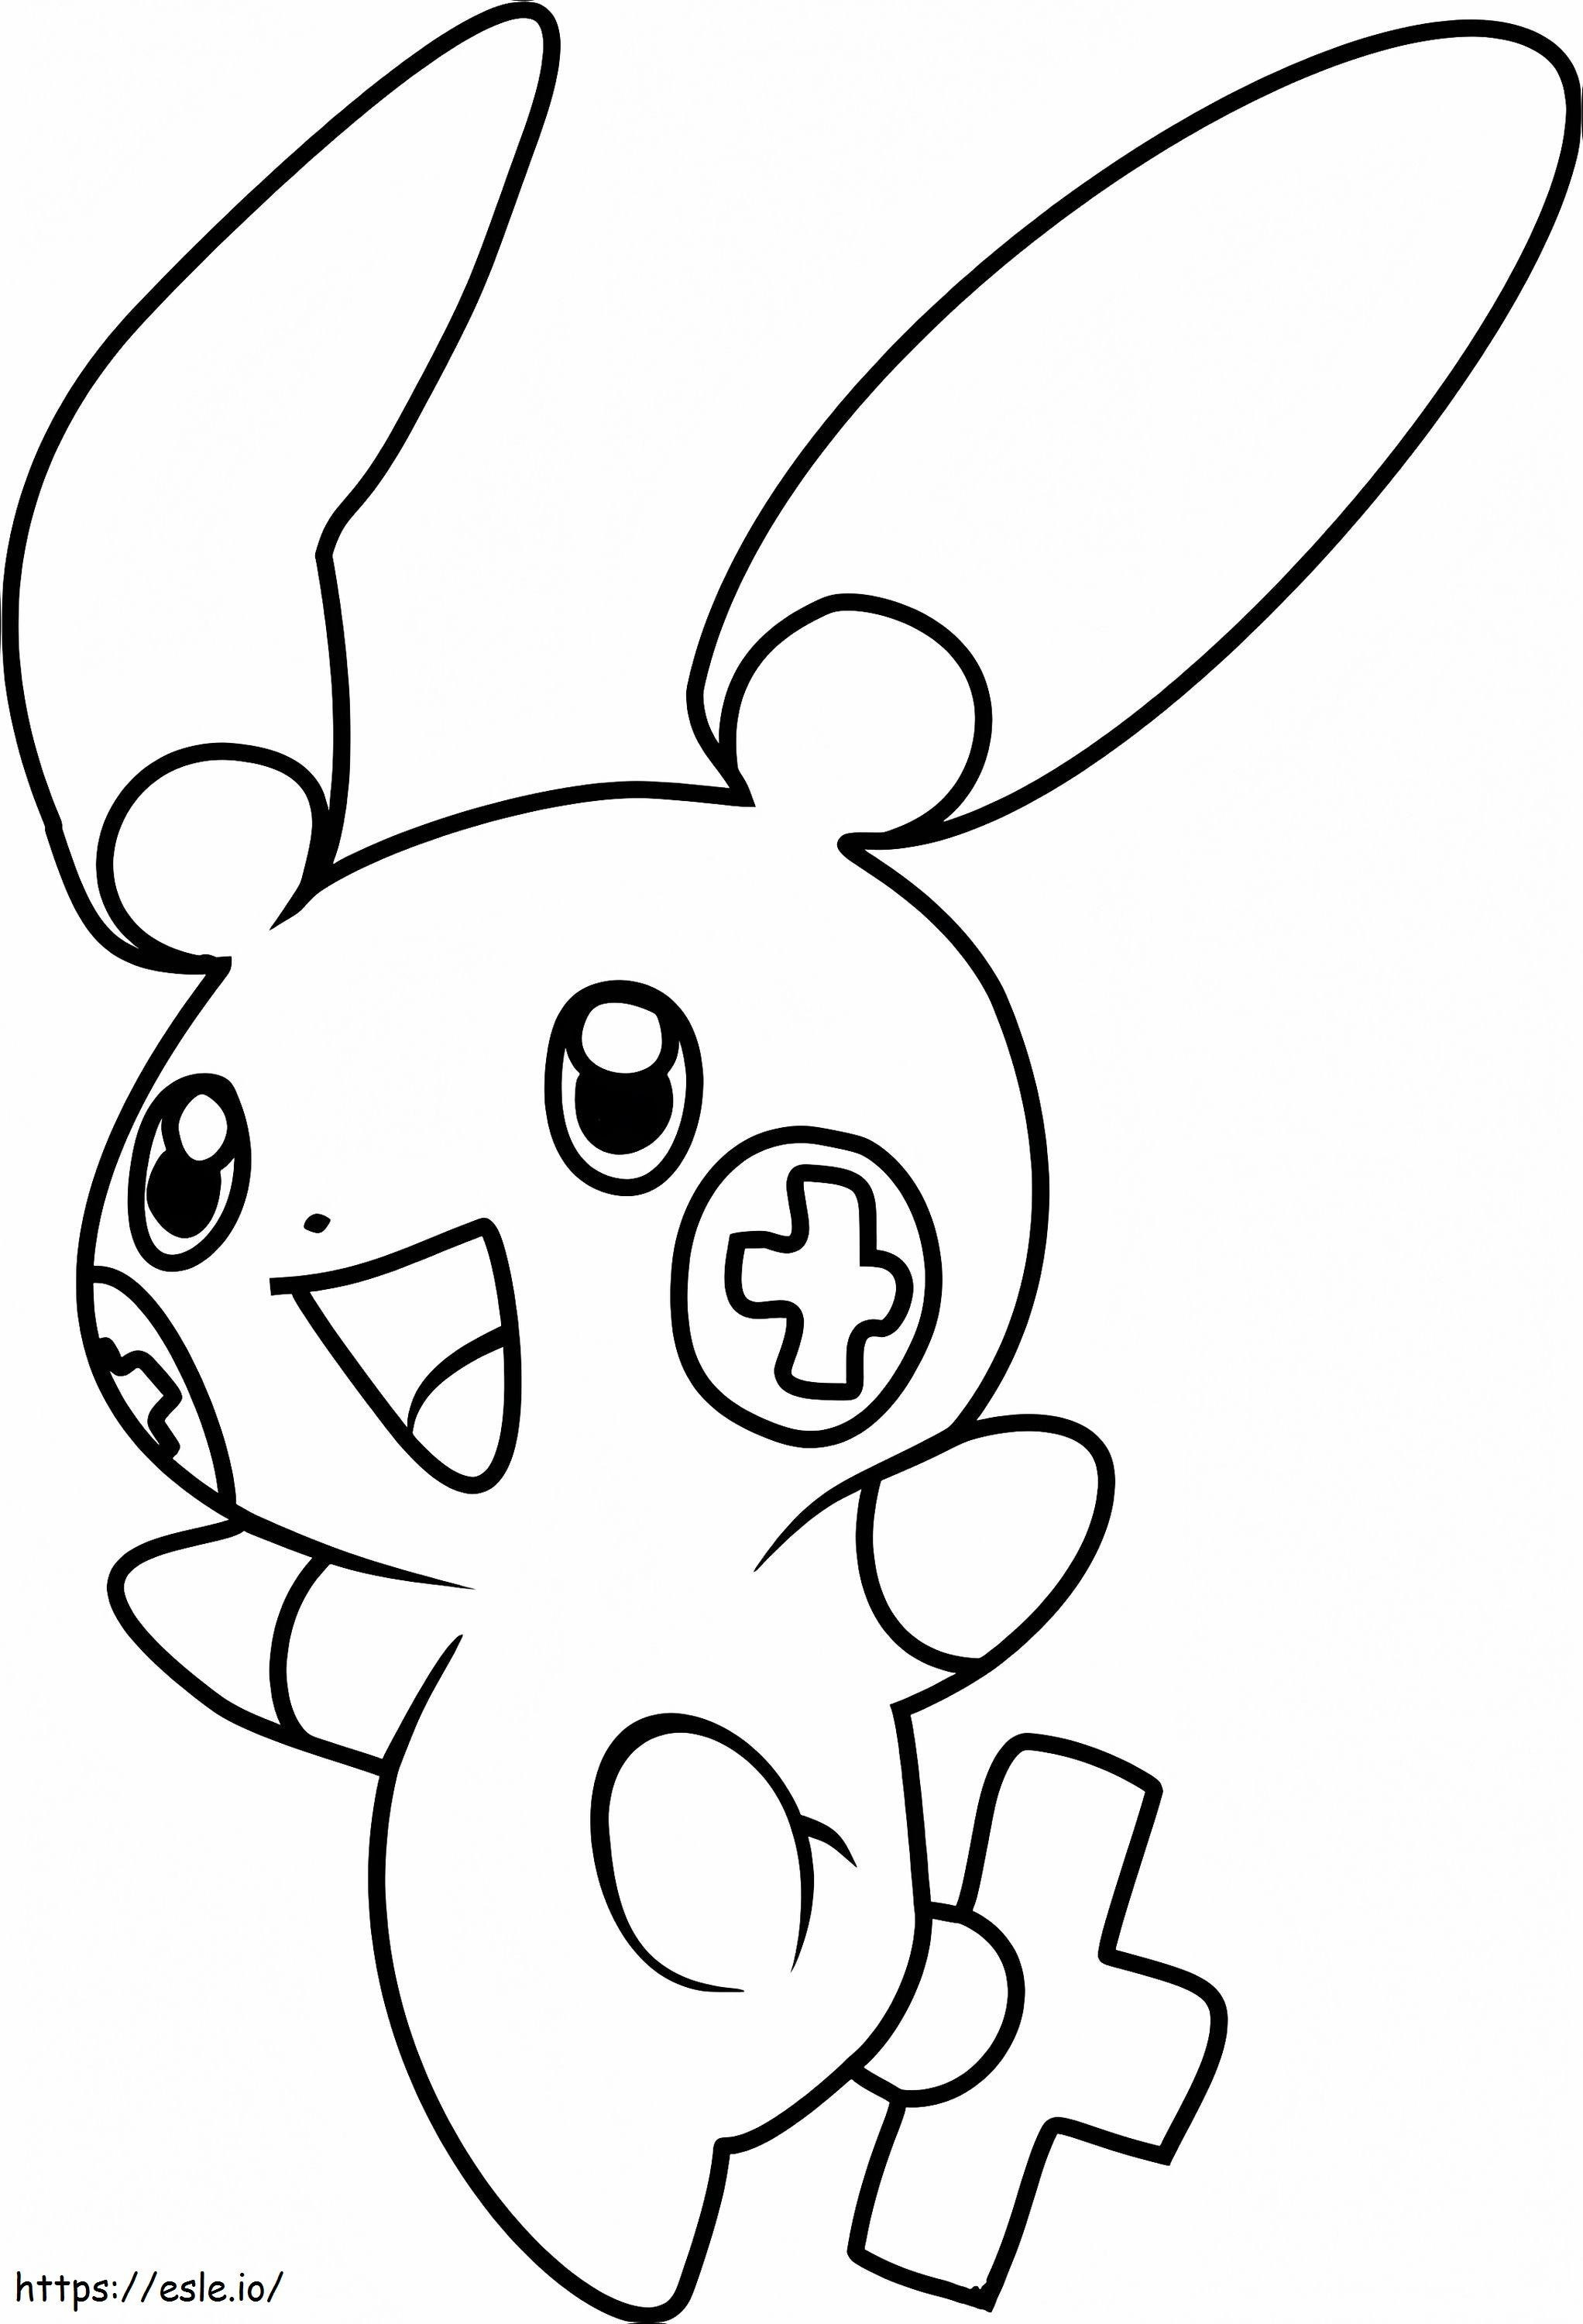 1532316334 Cute Plusle Pokemon A4 coloring page